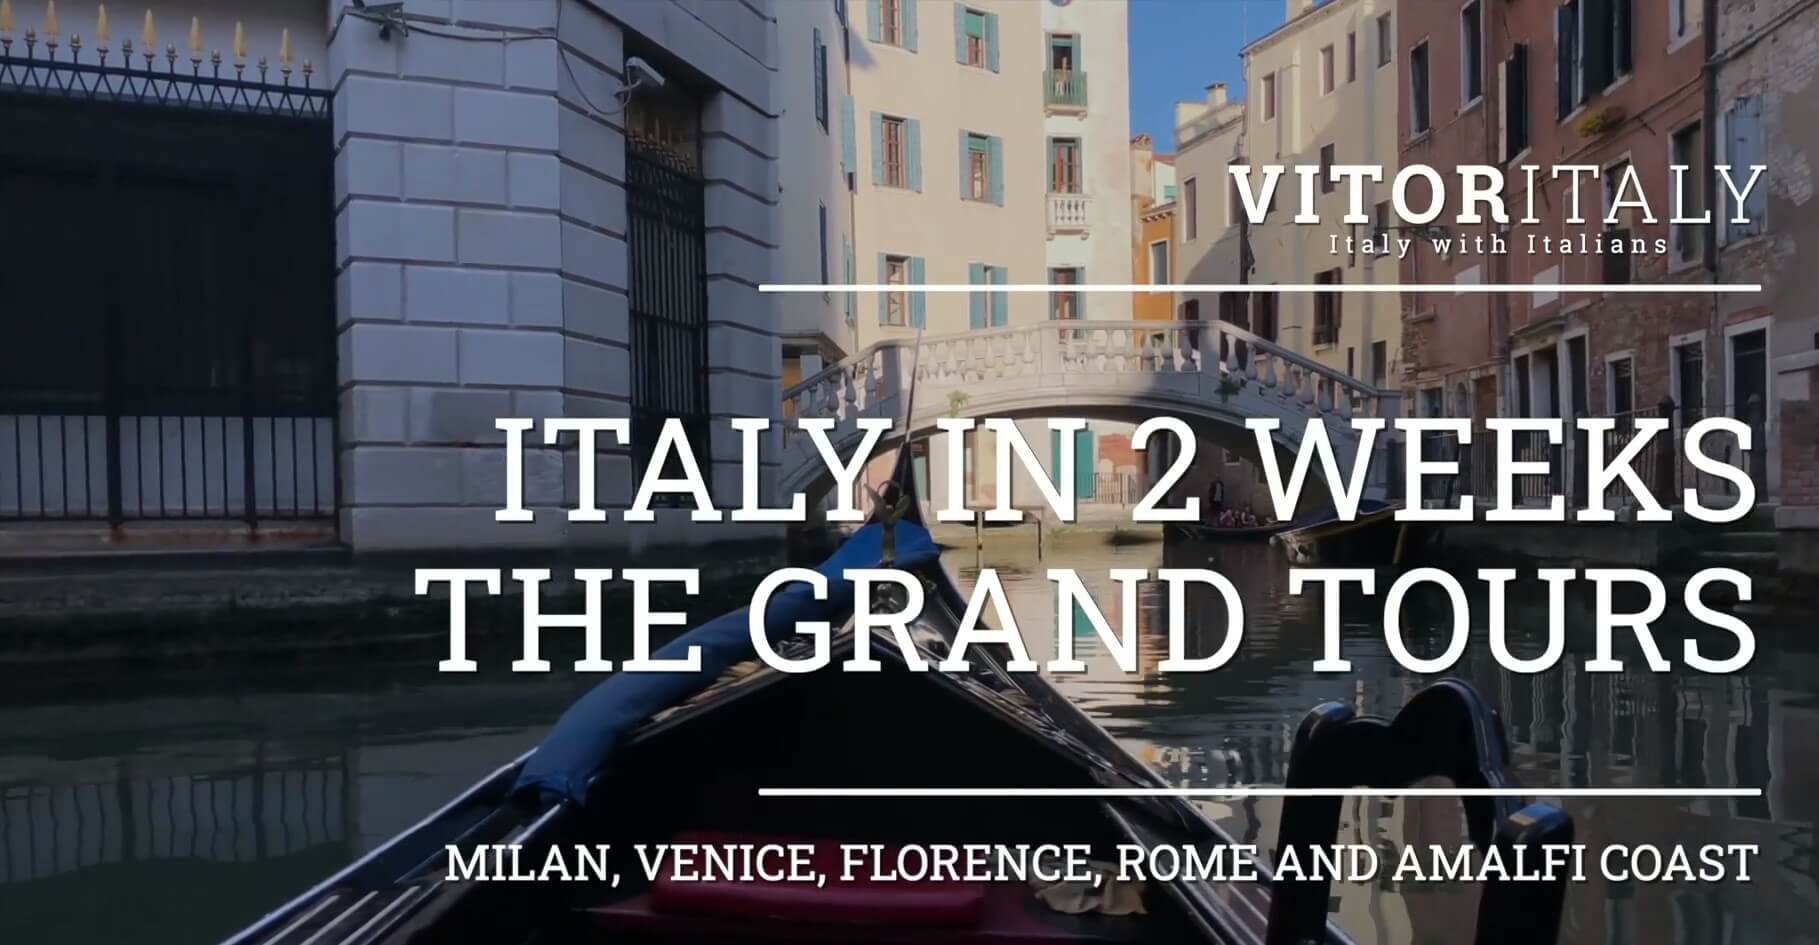 ITALY IN 2 WEEKS PRIVATE TOUR - Milan, Venice, Florence, Rome and Amalfi Coast